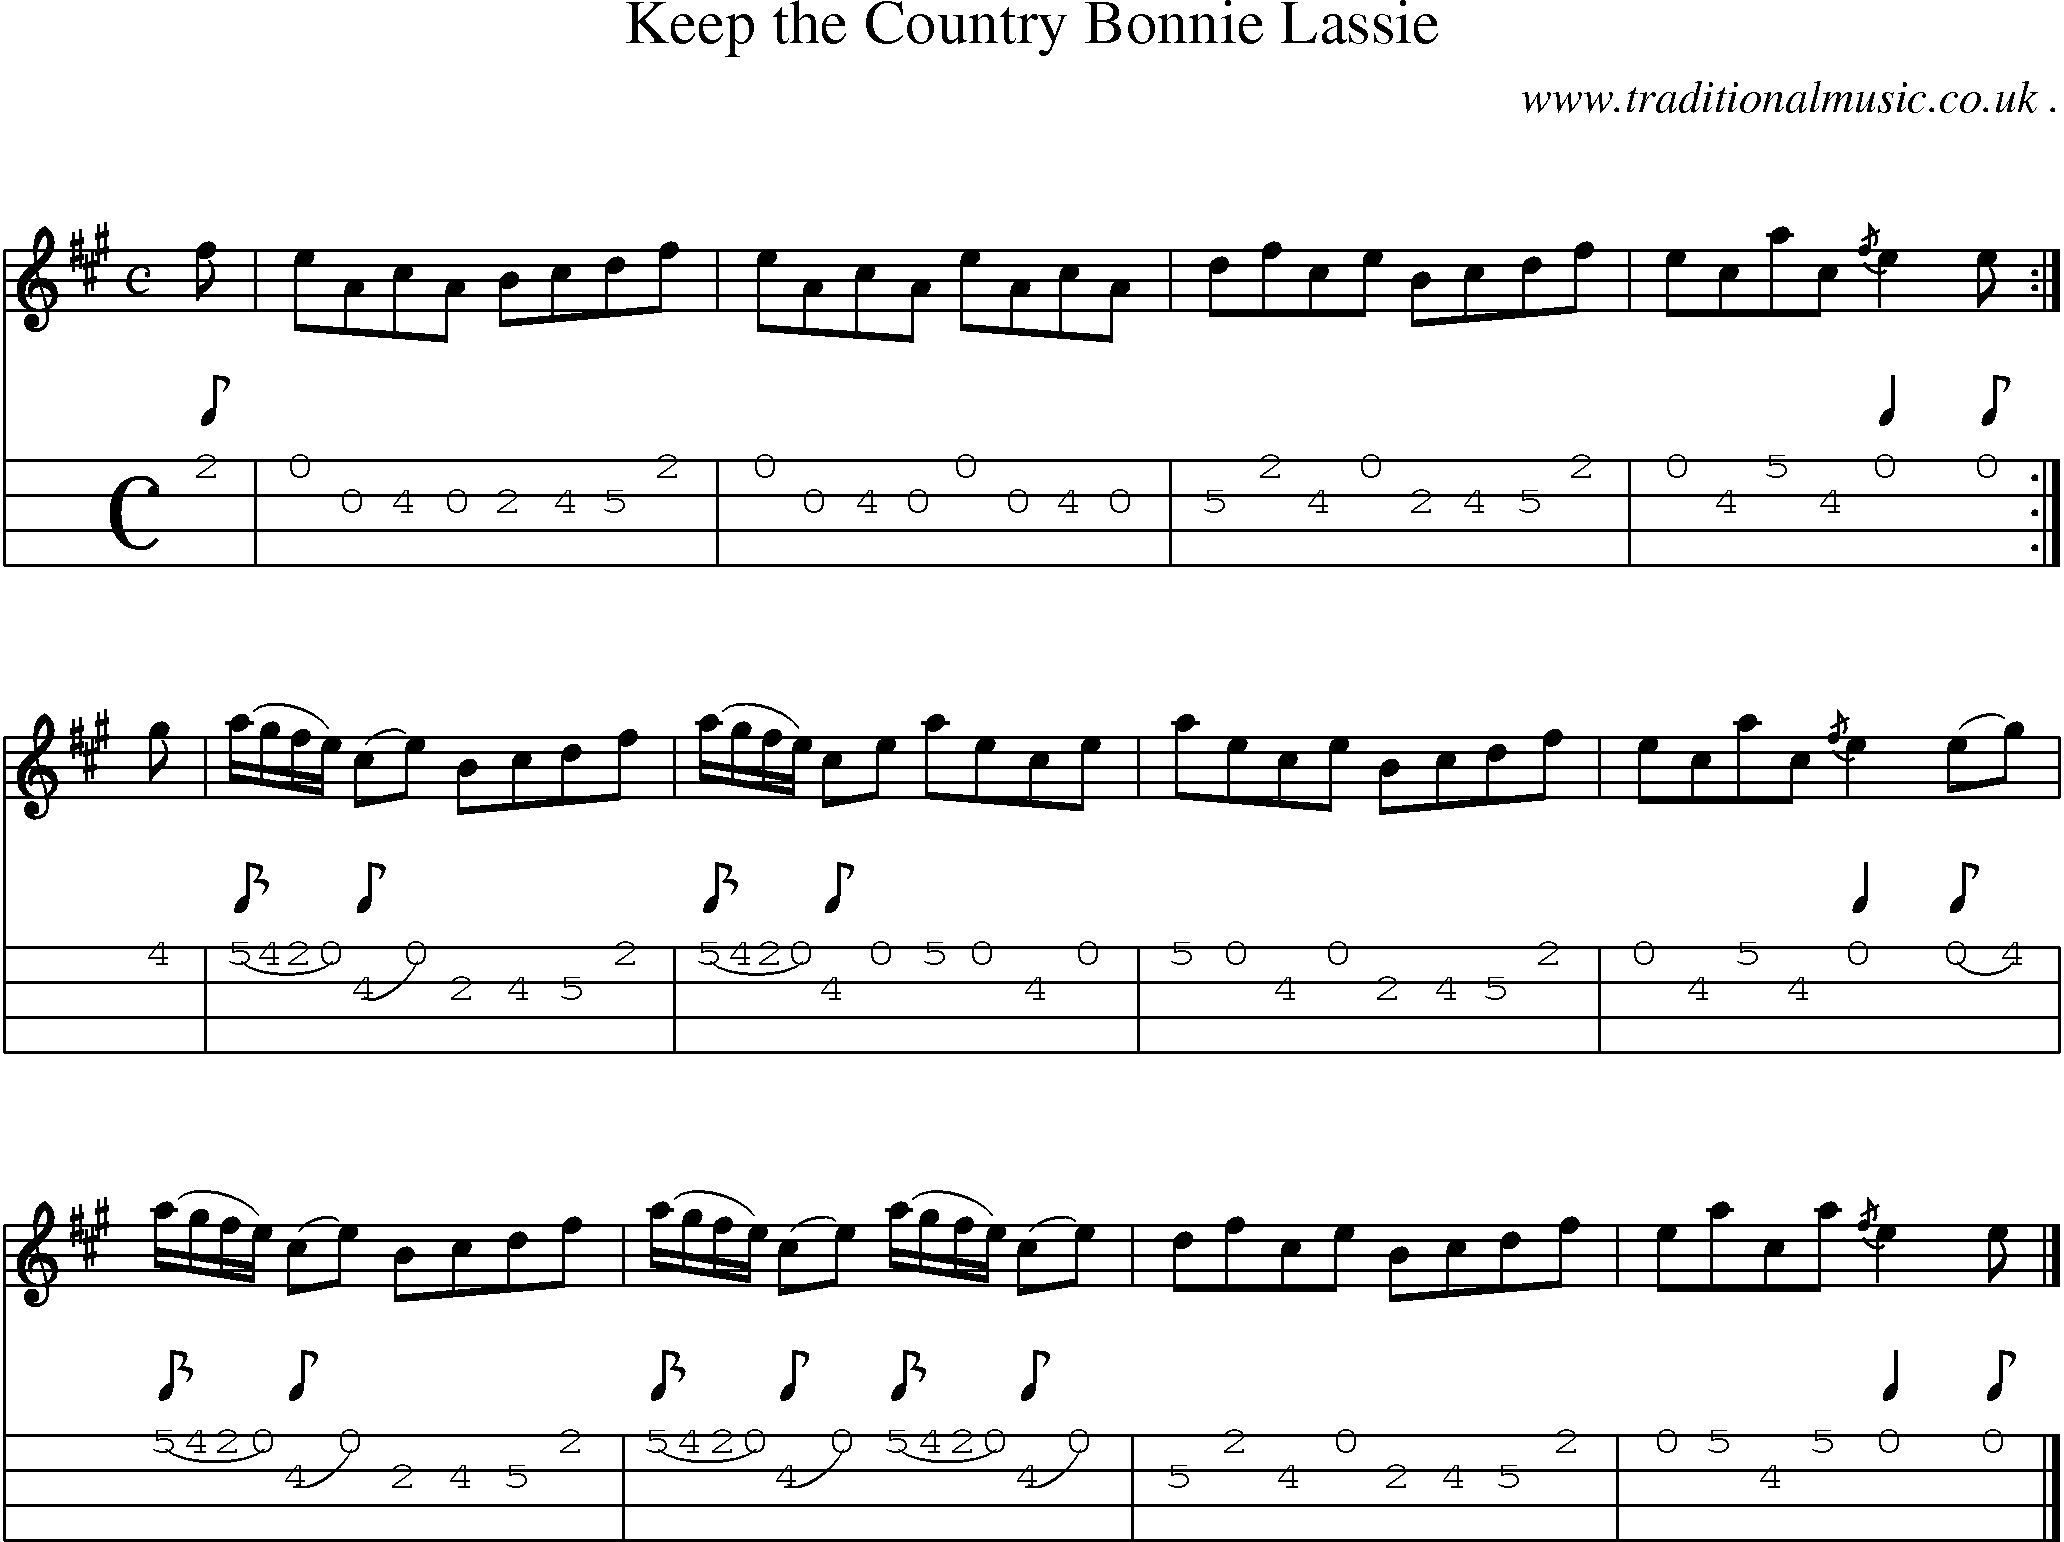 Sheet-music  score, Chords and Mandolin Tabs for Keep The Country Bonnie Lassie